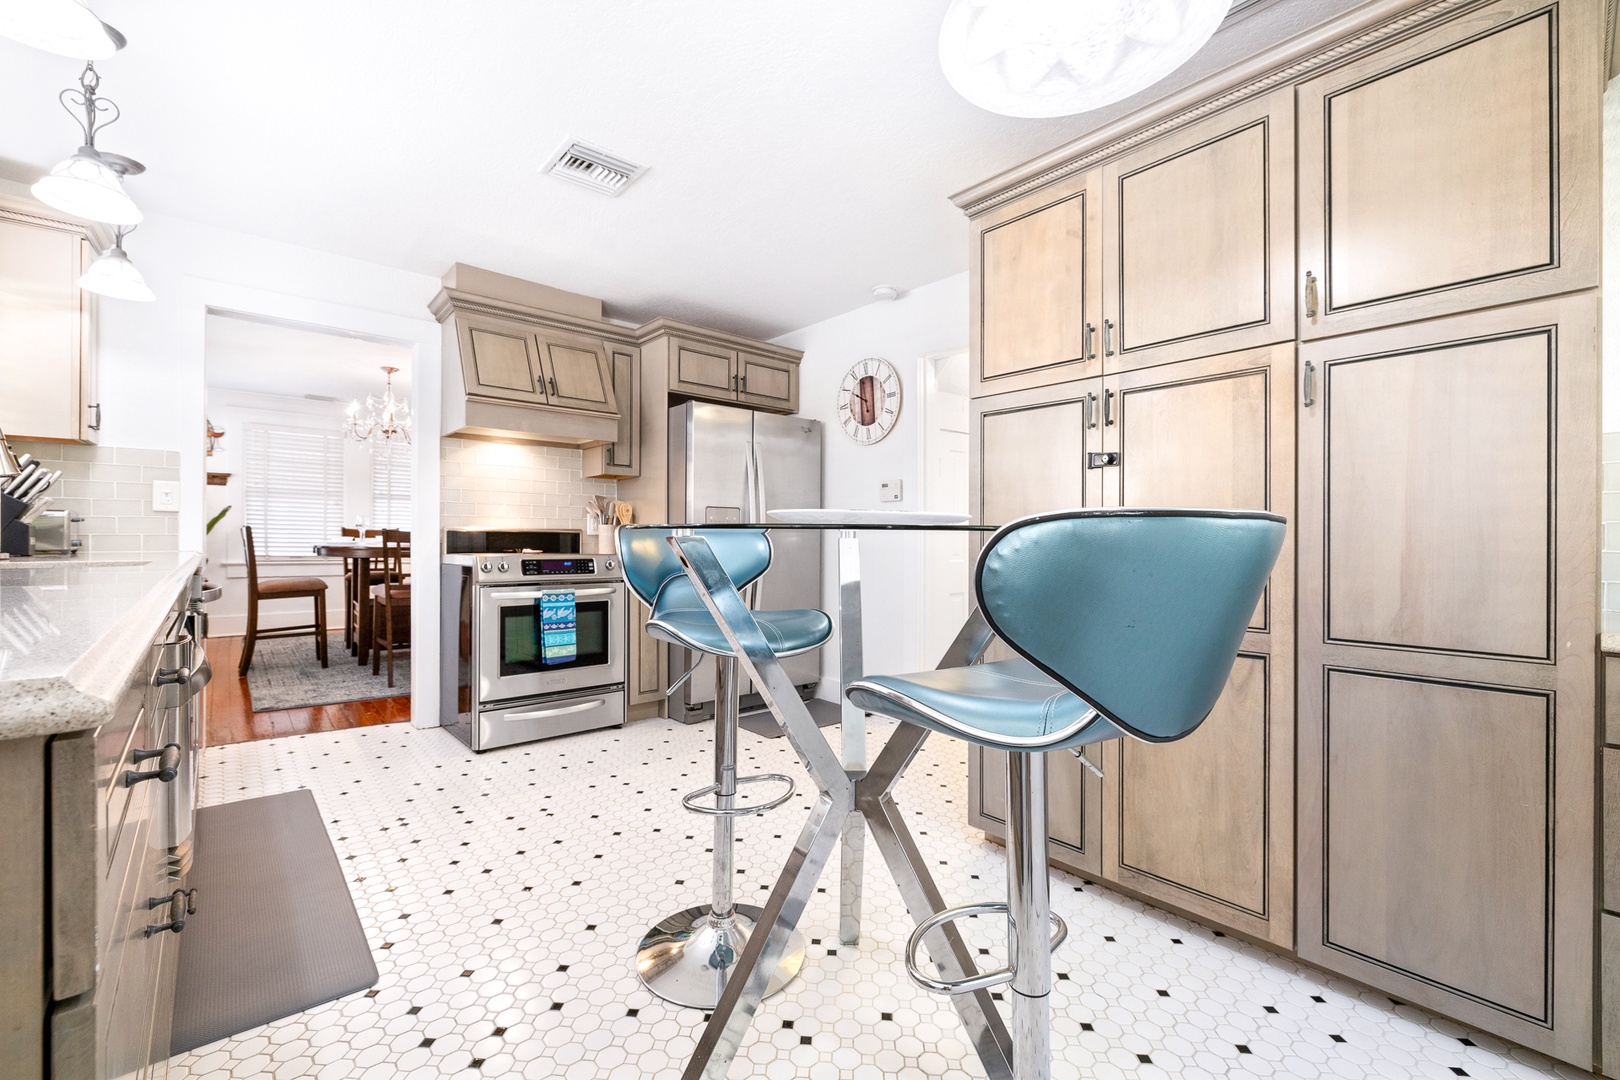 The airy kitchen offers ample storage space & all the comforts of home